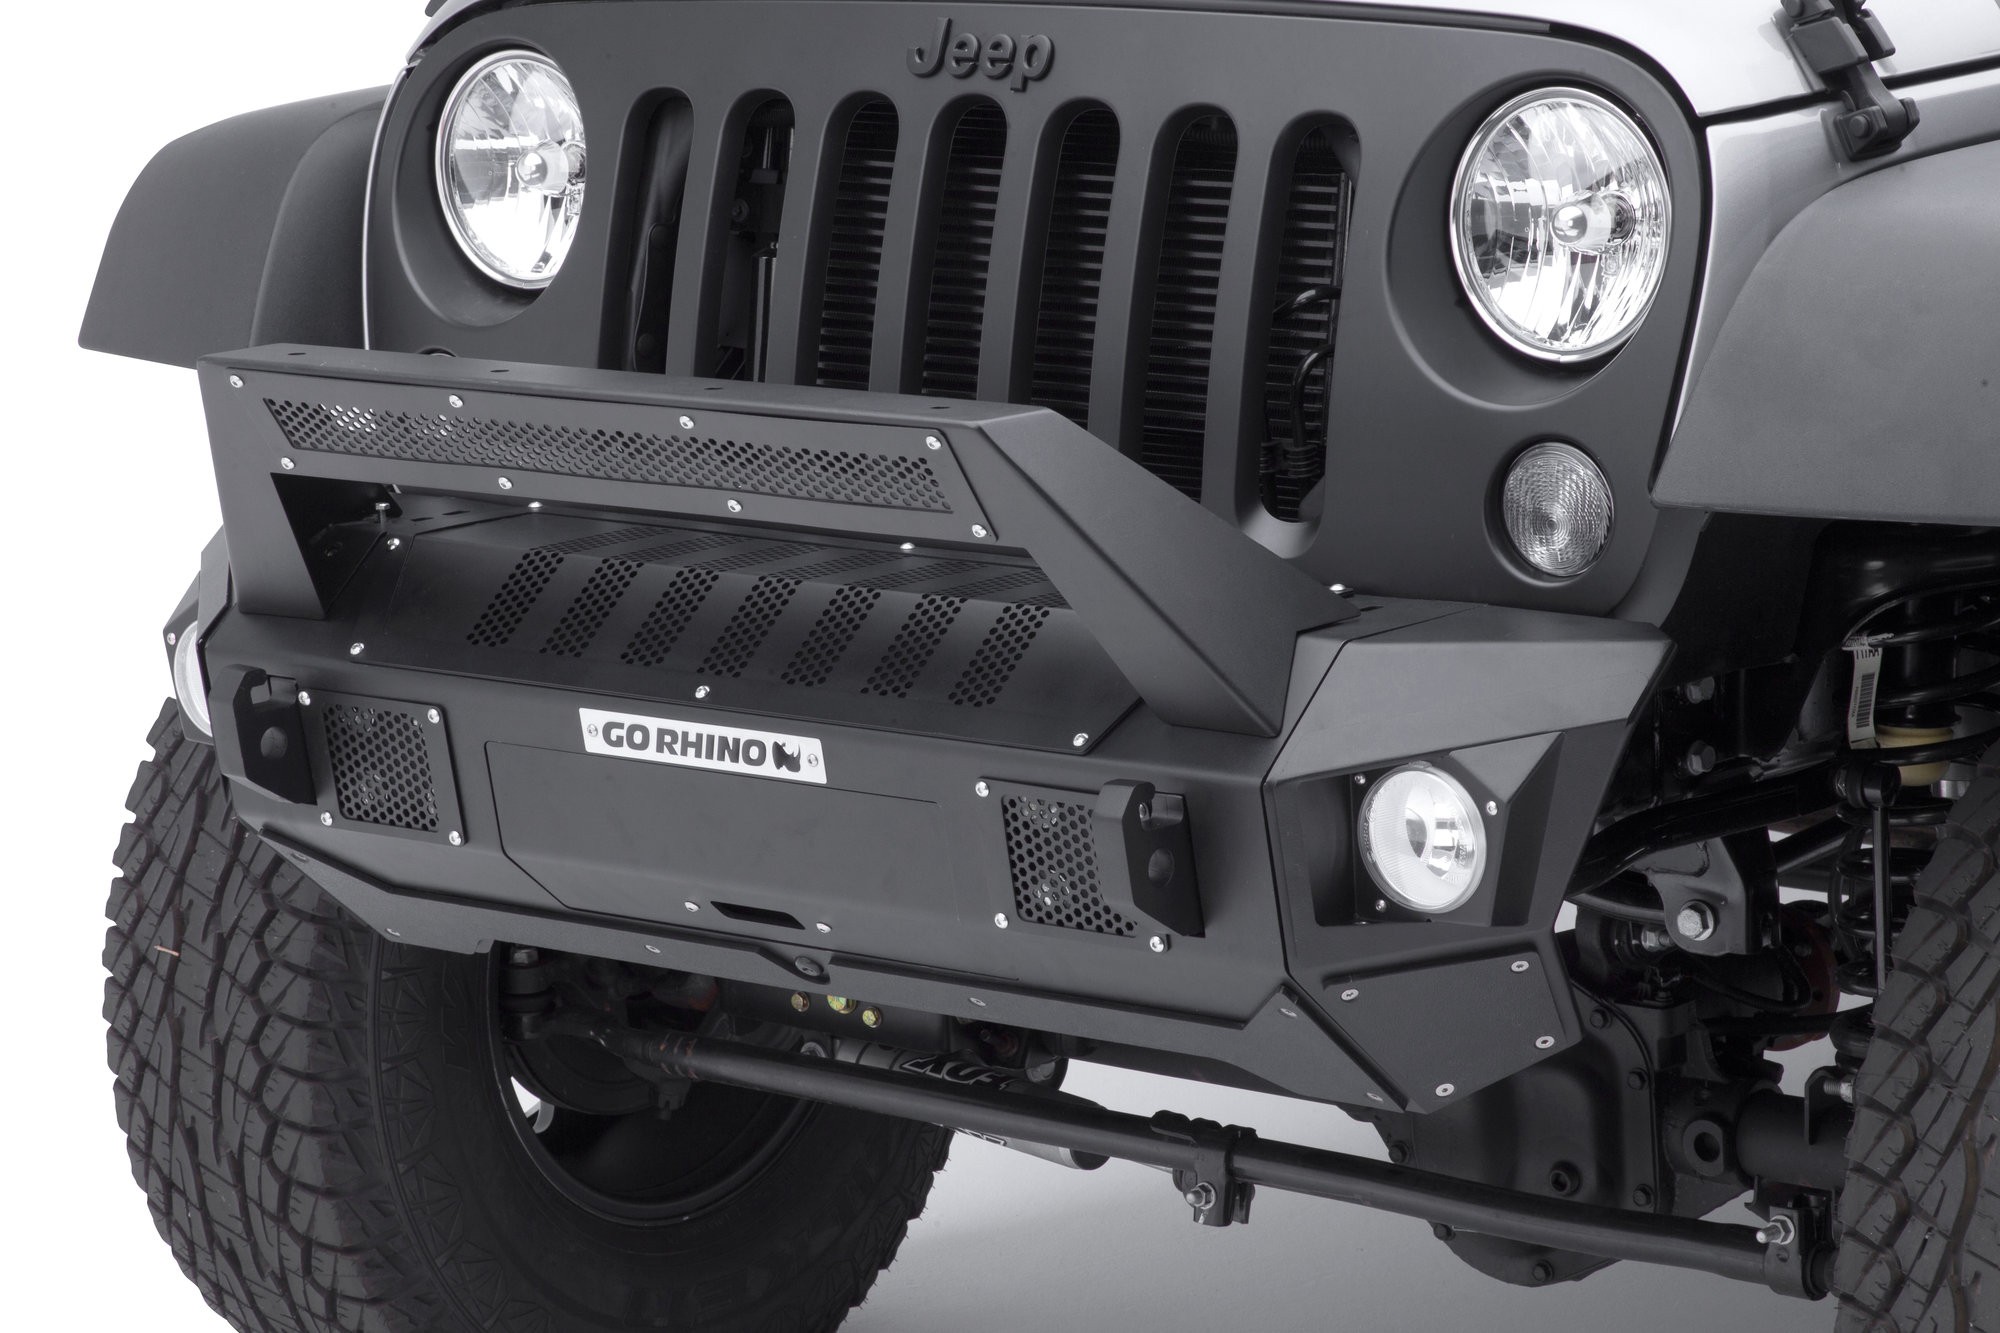 Go Rhino T Front Bumper with Stubby End Caps and Roadline Light Mount Bar for 07 18 Jeep Wrangler and Wrangler Unlimited JK